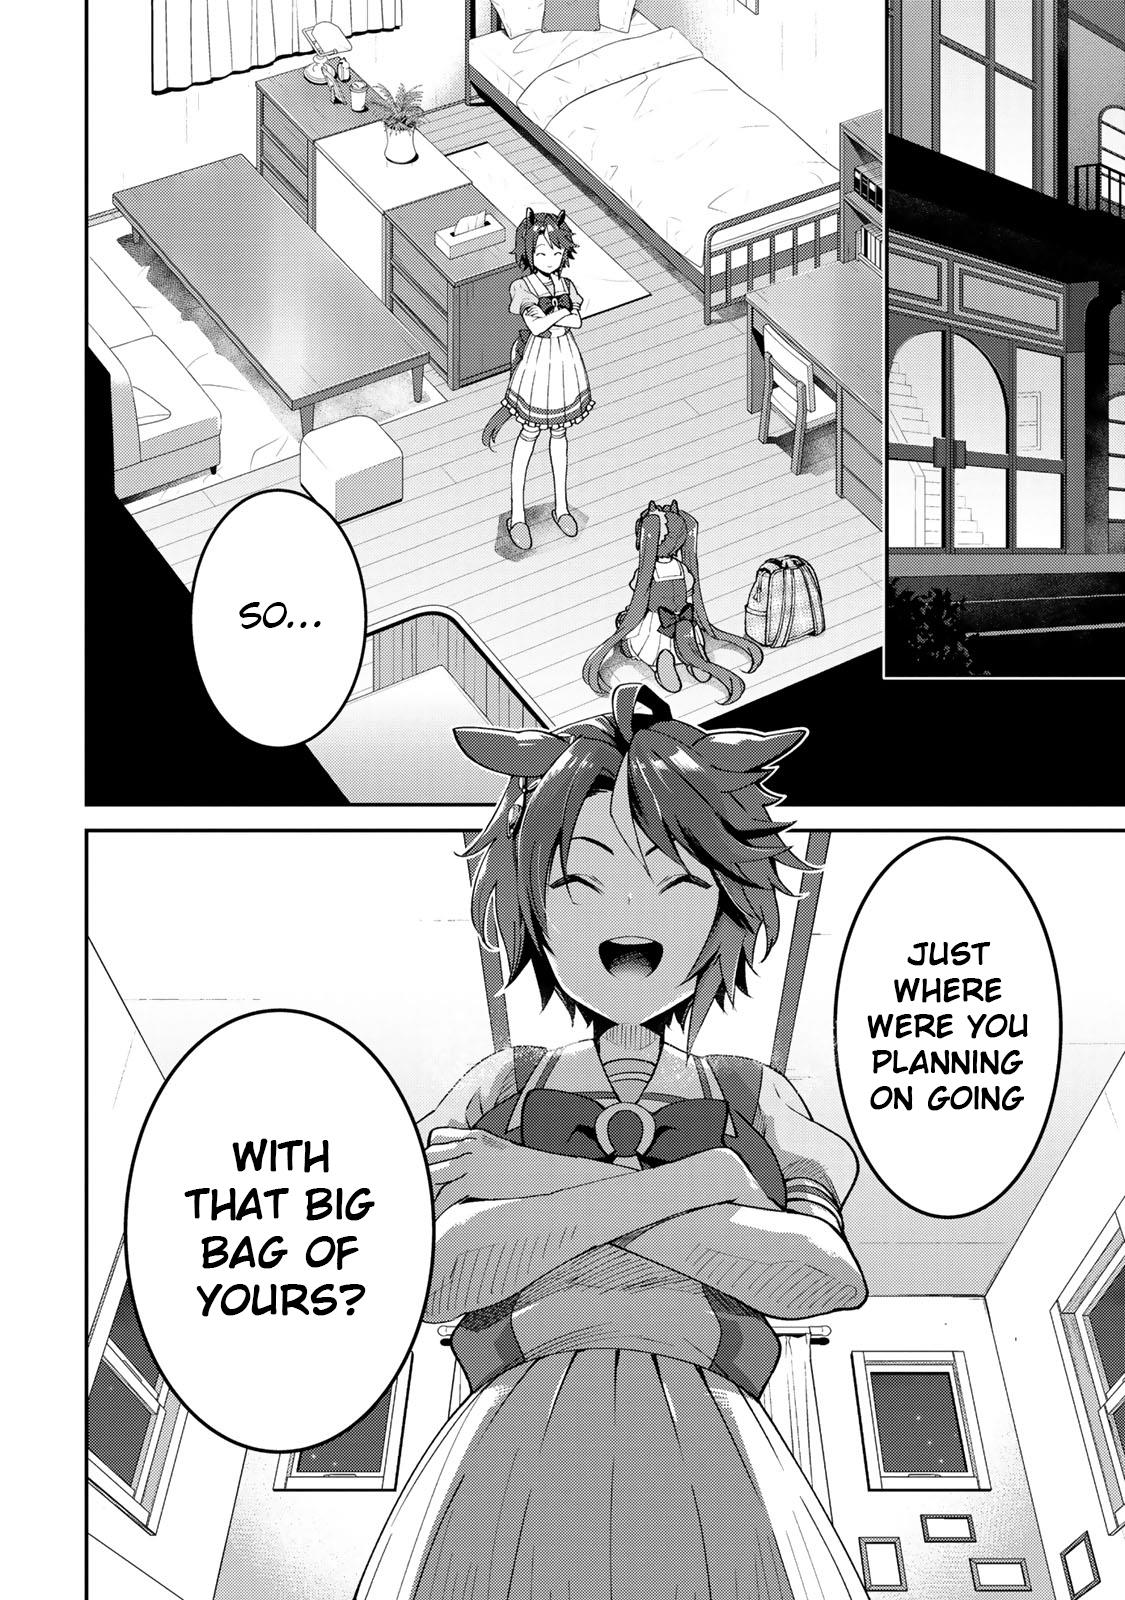 Starting Gate! Uma Musume Pretty Derby Vol.4 Chapter 25: Vodka And Scarlet #3 - Picture 2